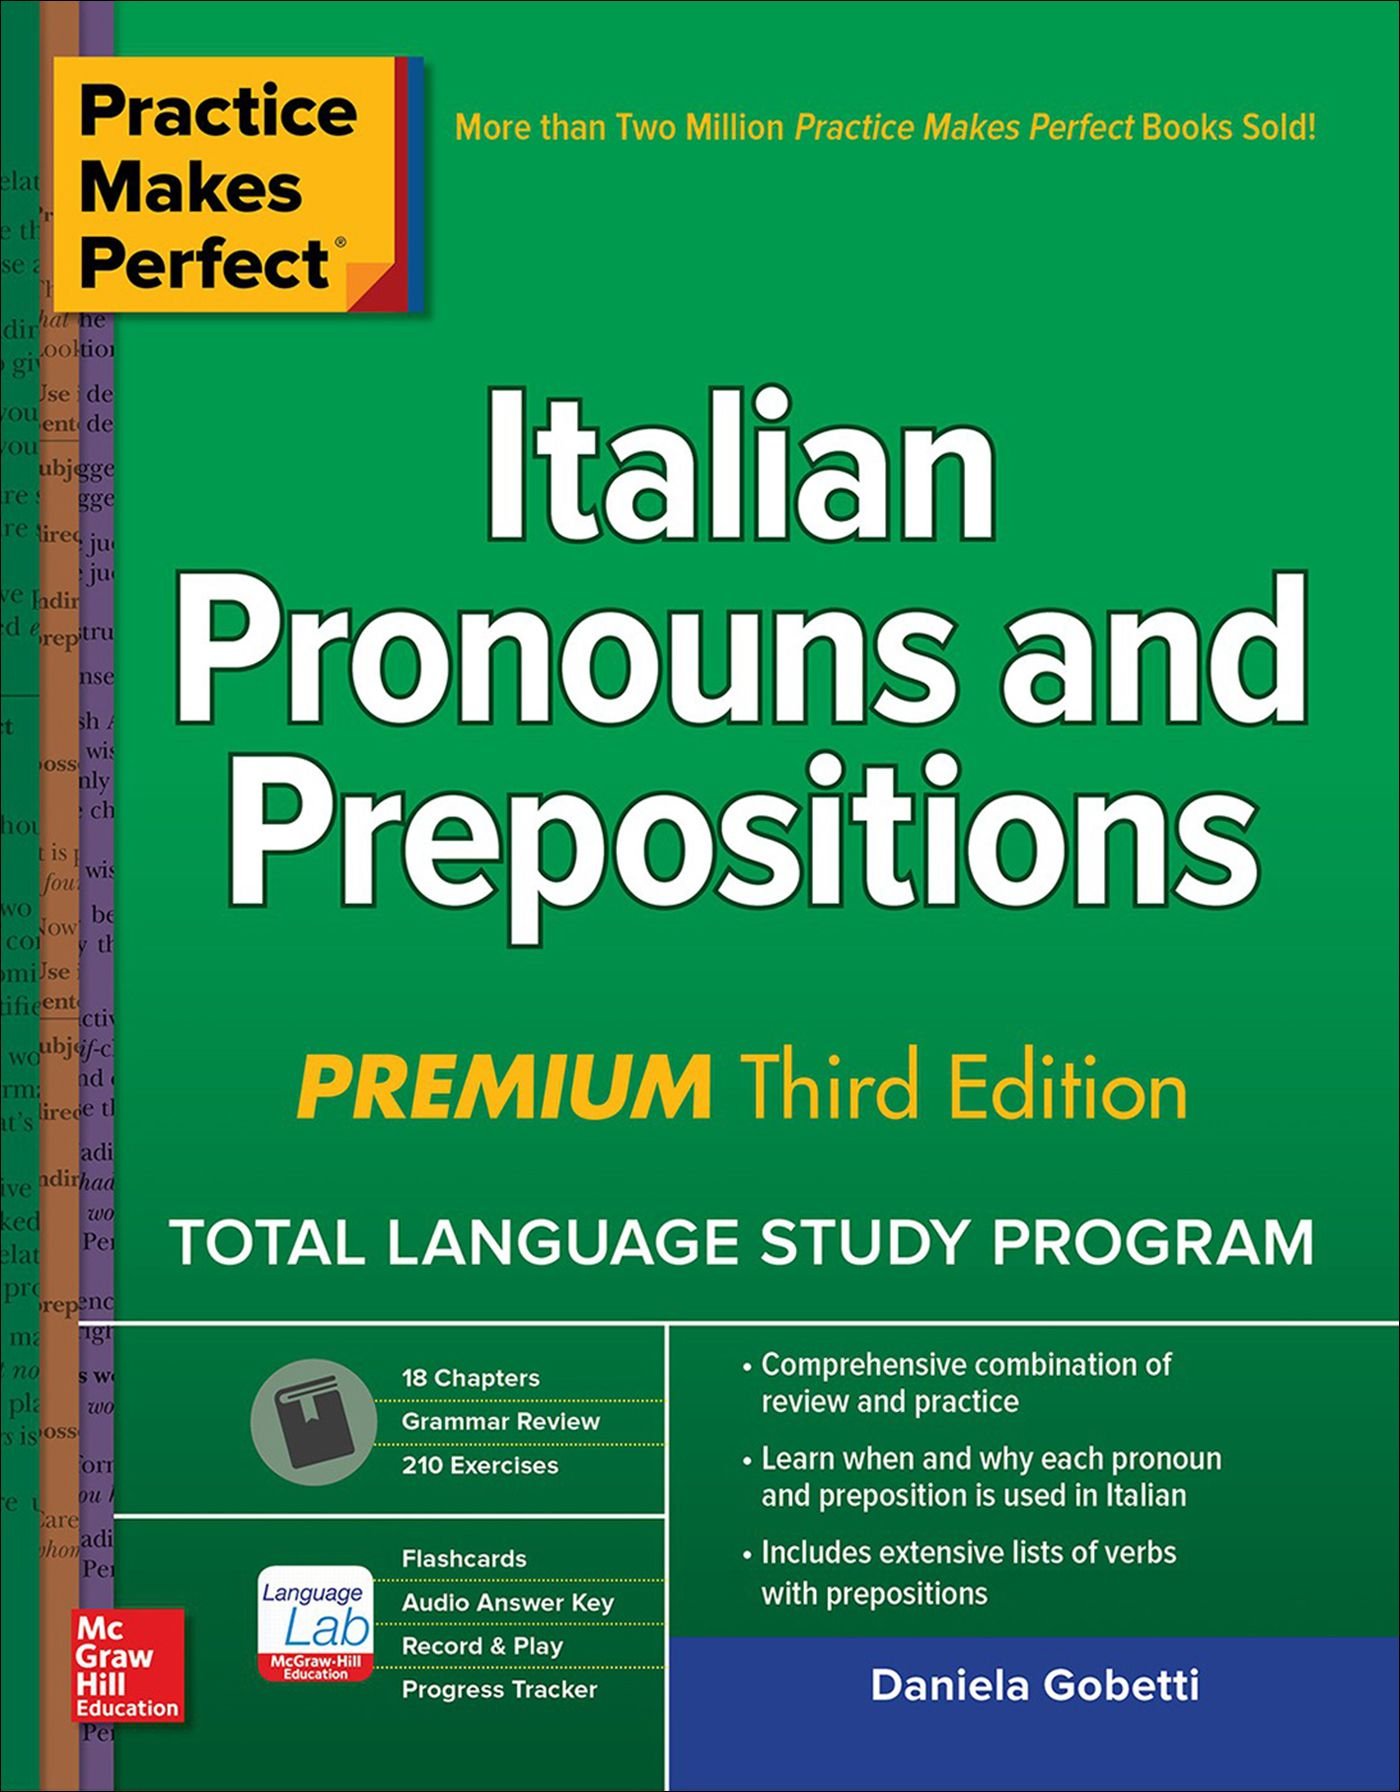 practice-makes-perfect-italian-pronouns-and-prepositions-3rd-edition-softarchive